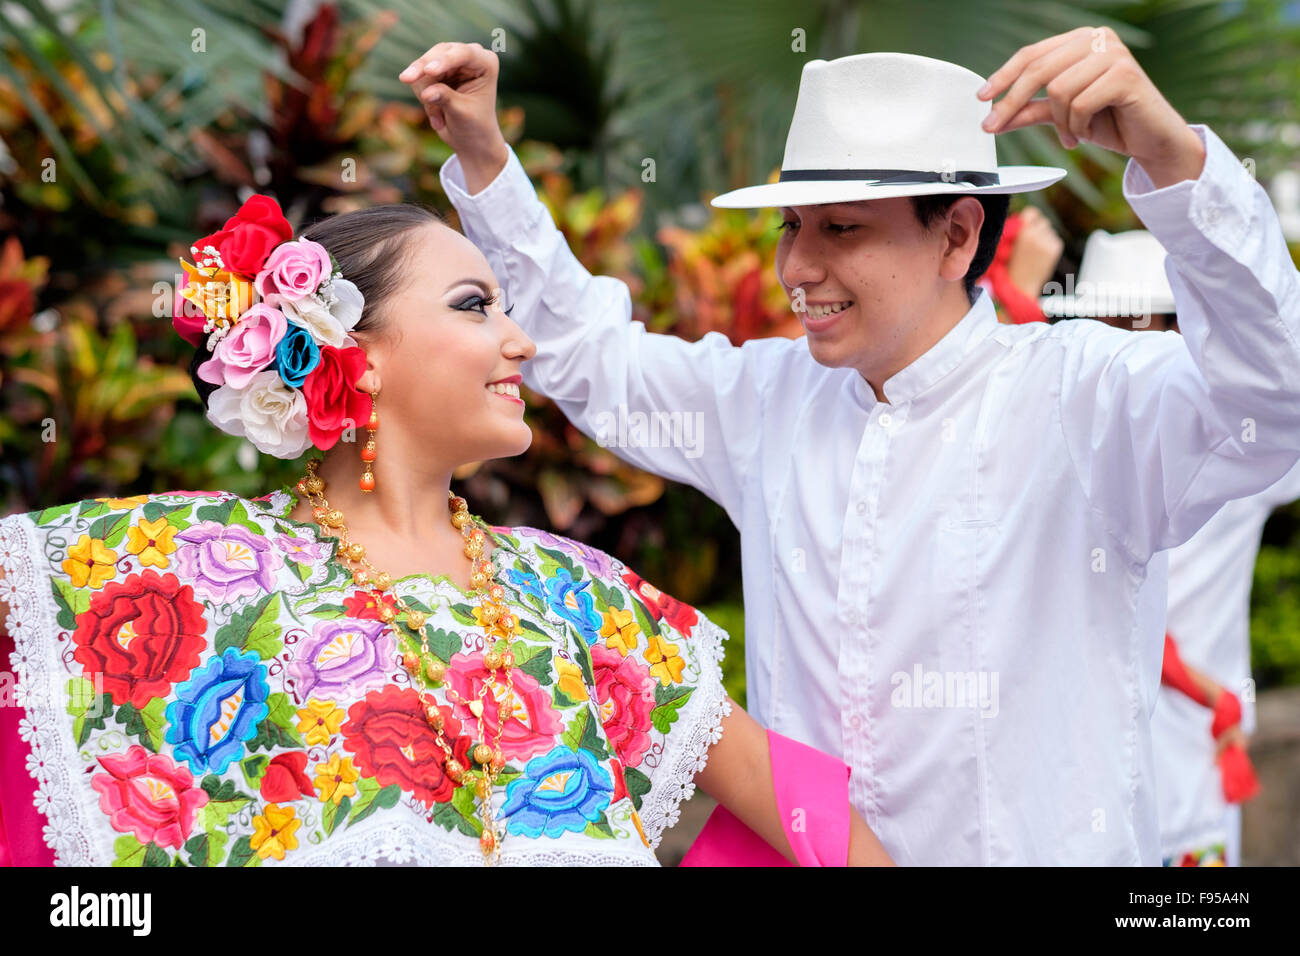 Pure joy - Puerto Vallarta, Jalisco, Mexico. Xiutla Dancers - a folkloristic Mexican dance group in traditional costumes represe Stock Photo